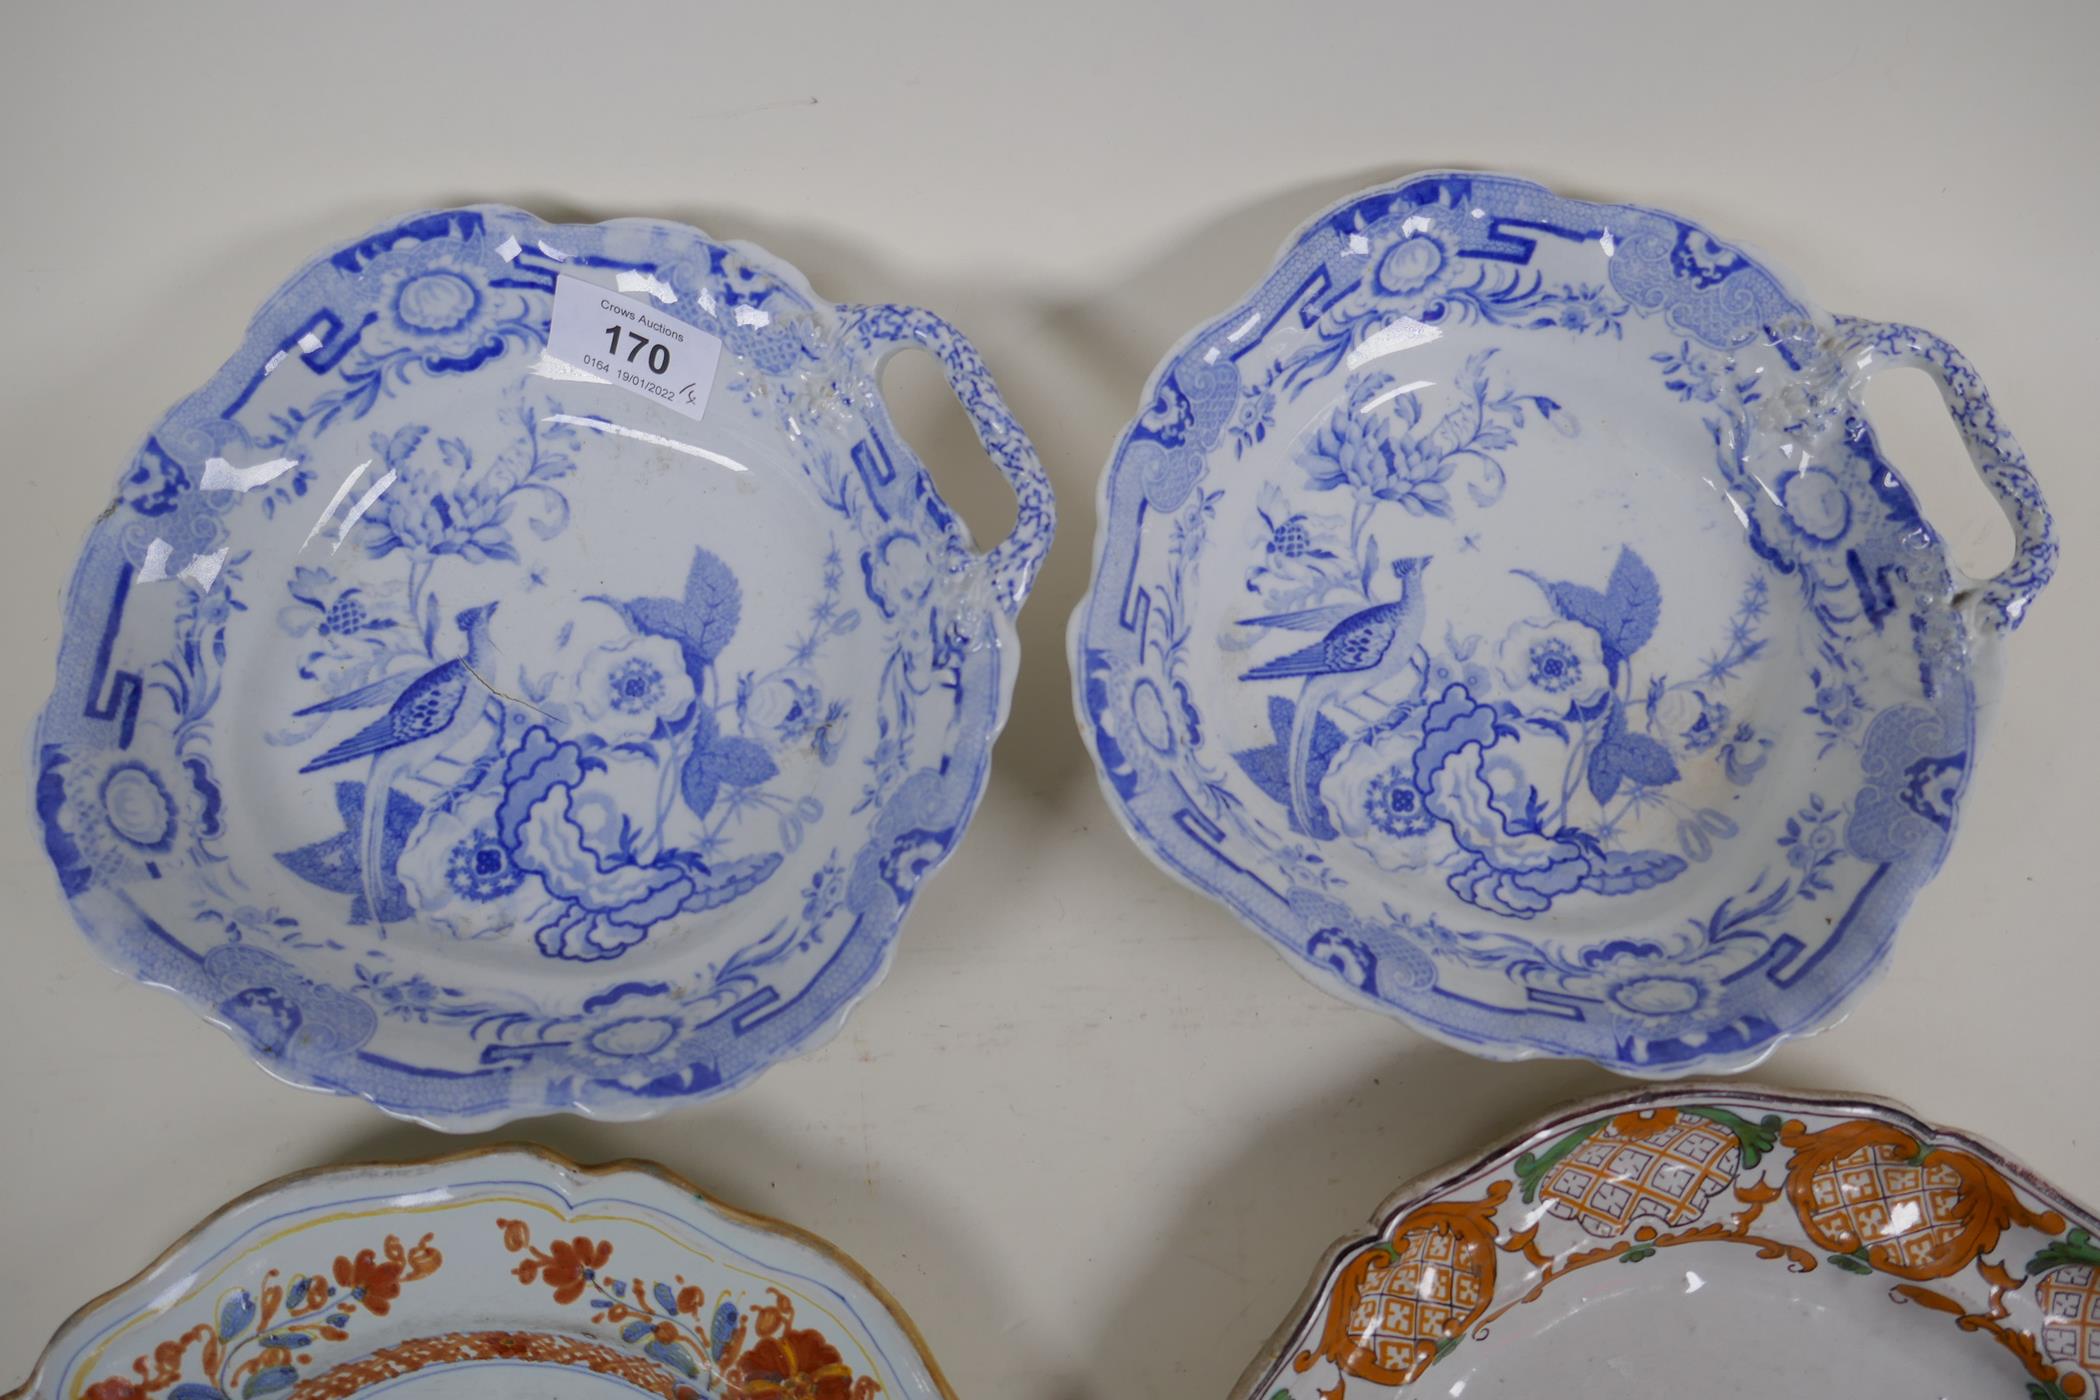 Two C19th Hicks and Meigh blue and white leaf shaped porcelain serving dishes, 8" diameter, and - Image 4 of 18